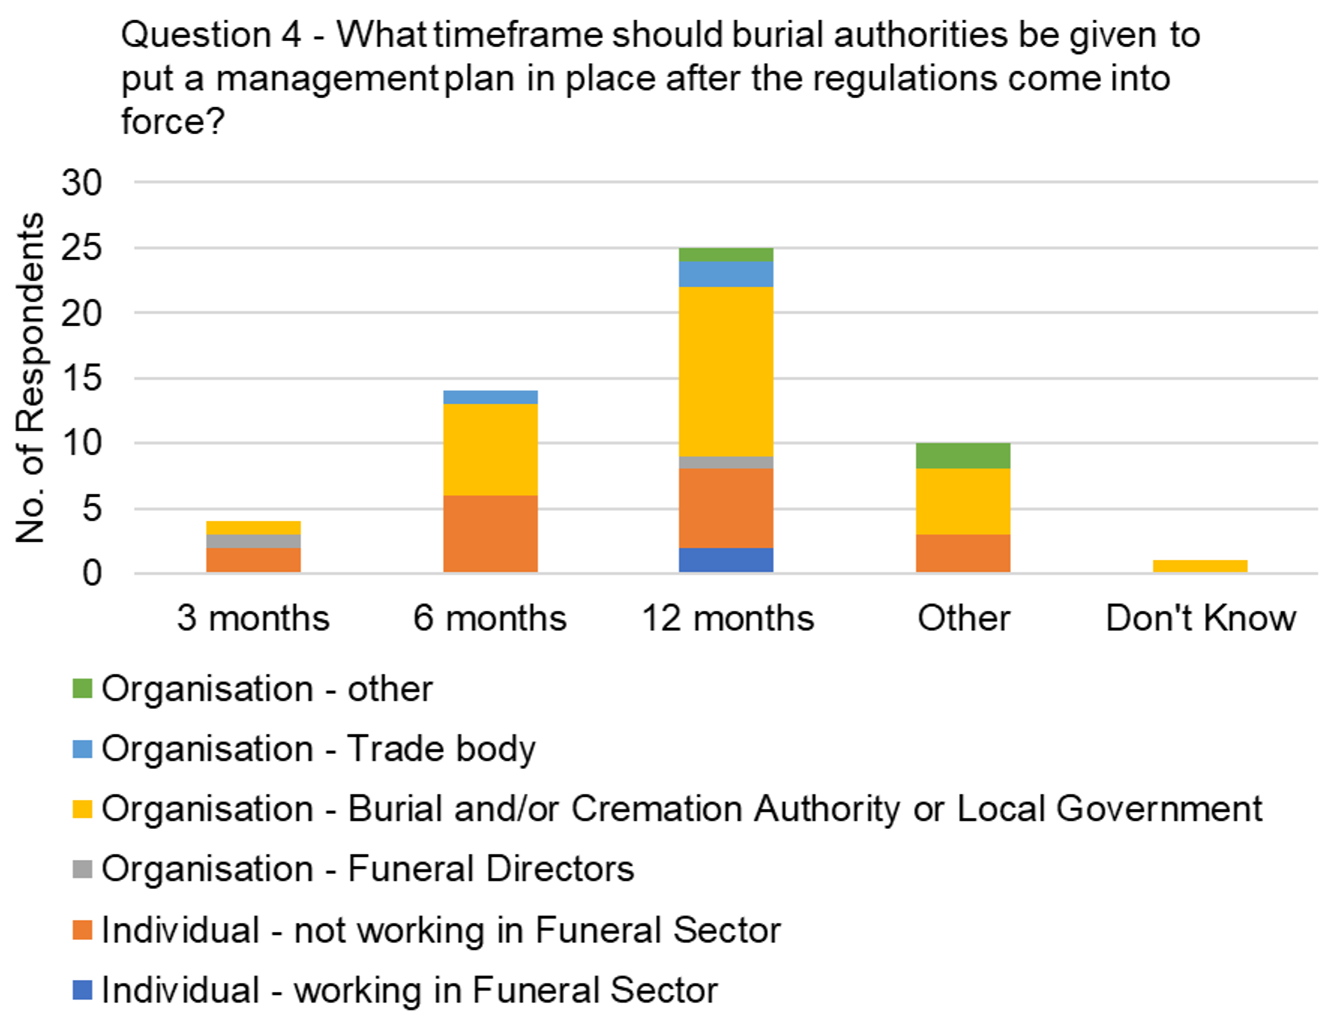 The graph visually presents the data from table 4, focussing on the responses to the question, "What timeframe should burial authorities be given to put a management plan in place after the regulations come into force?"